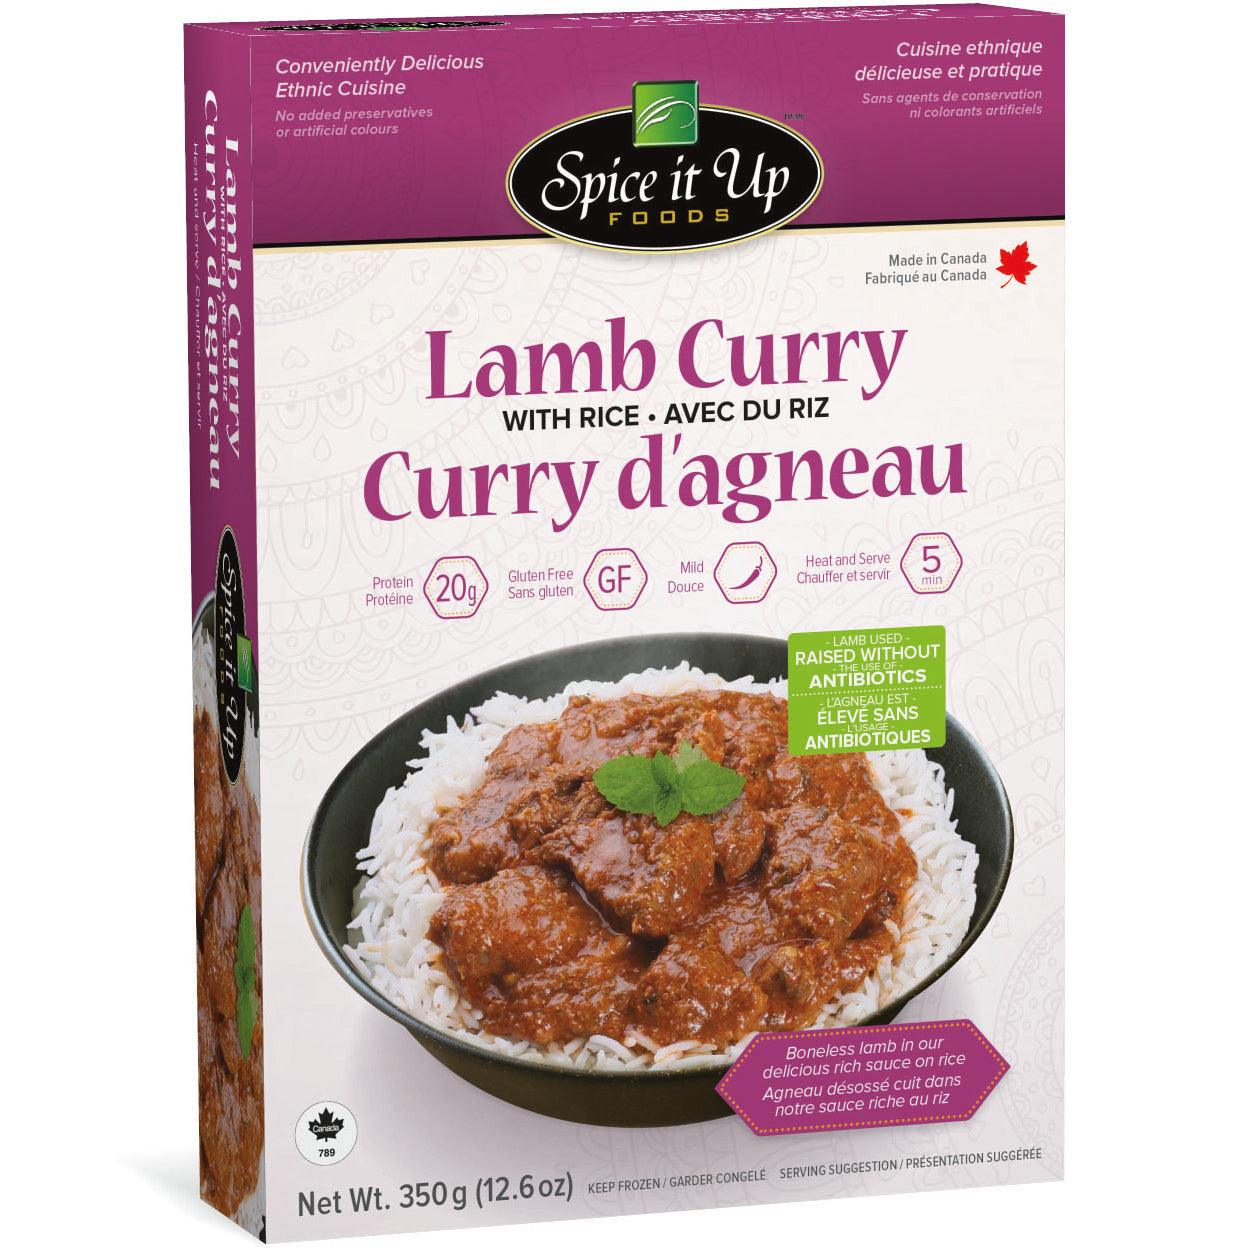 Lamb Curry with Rice